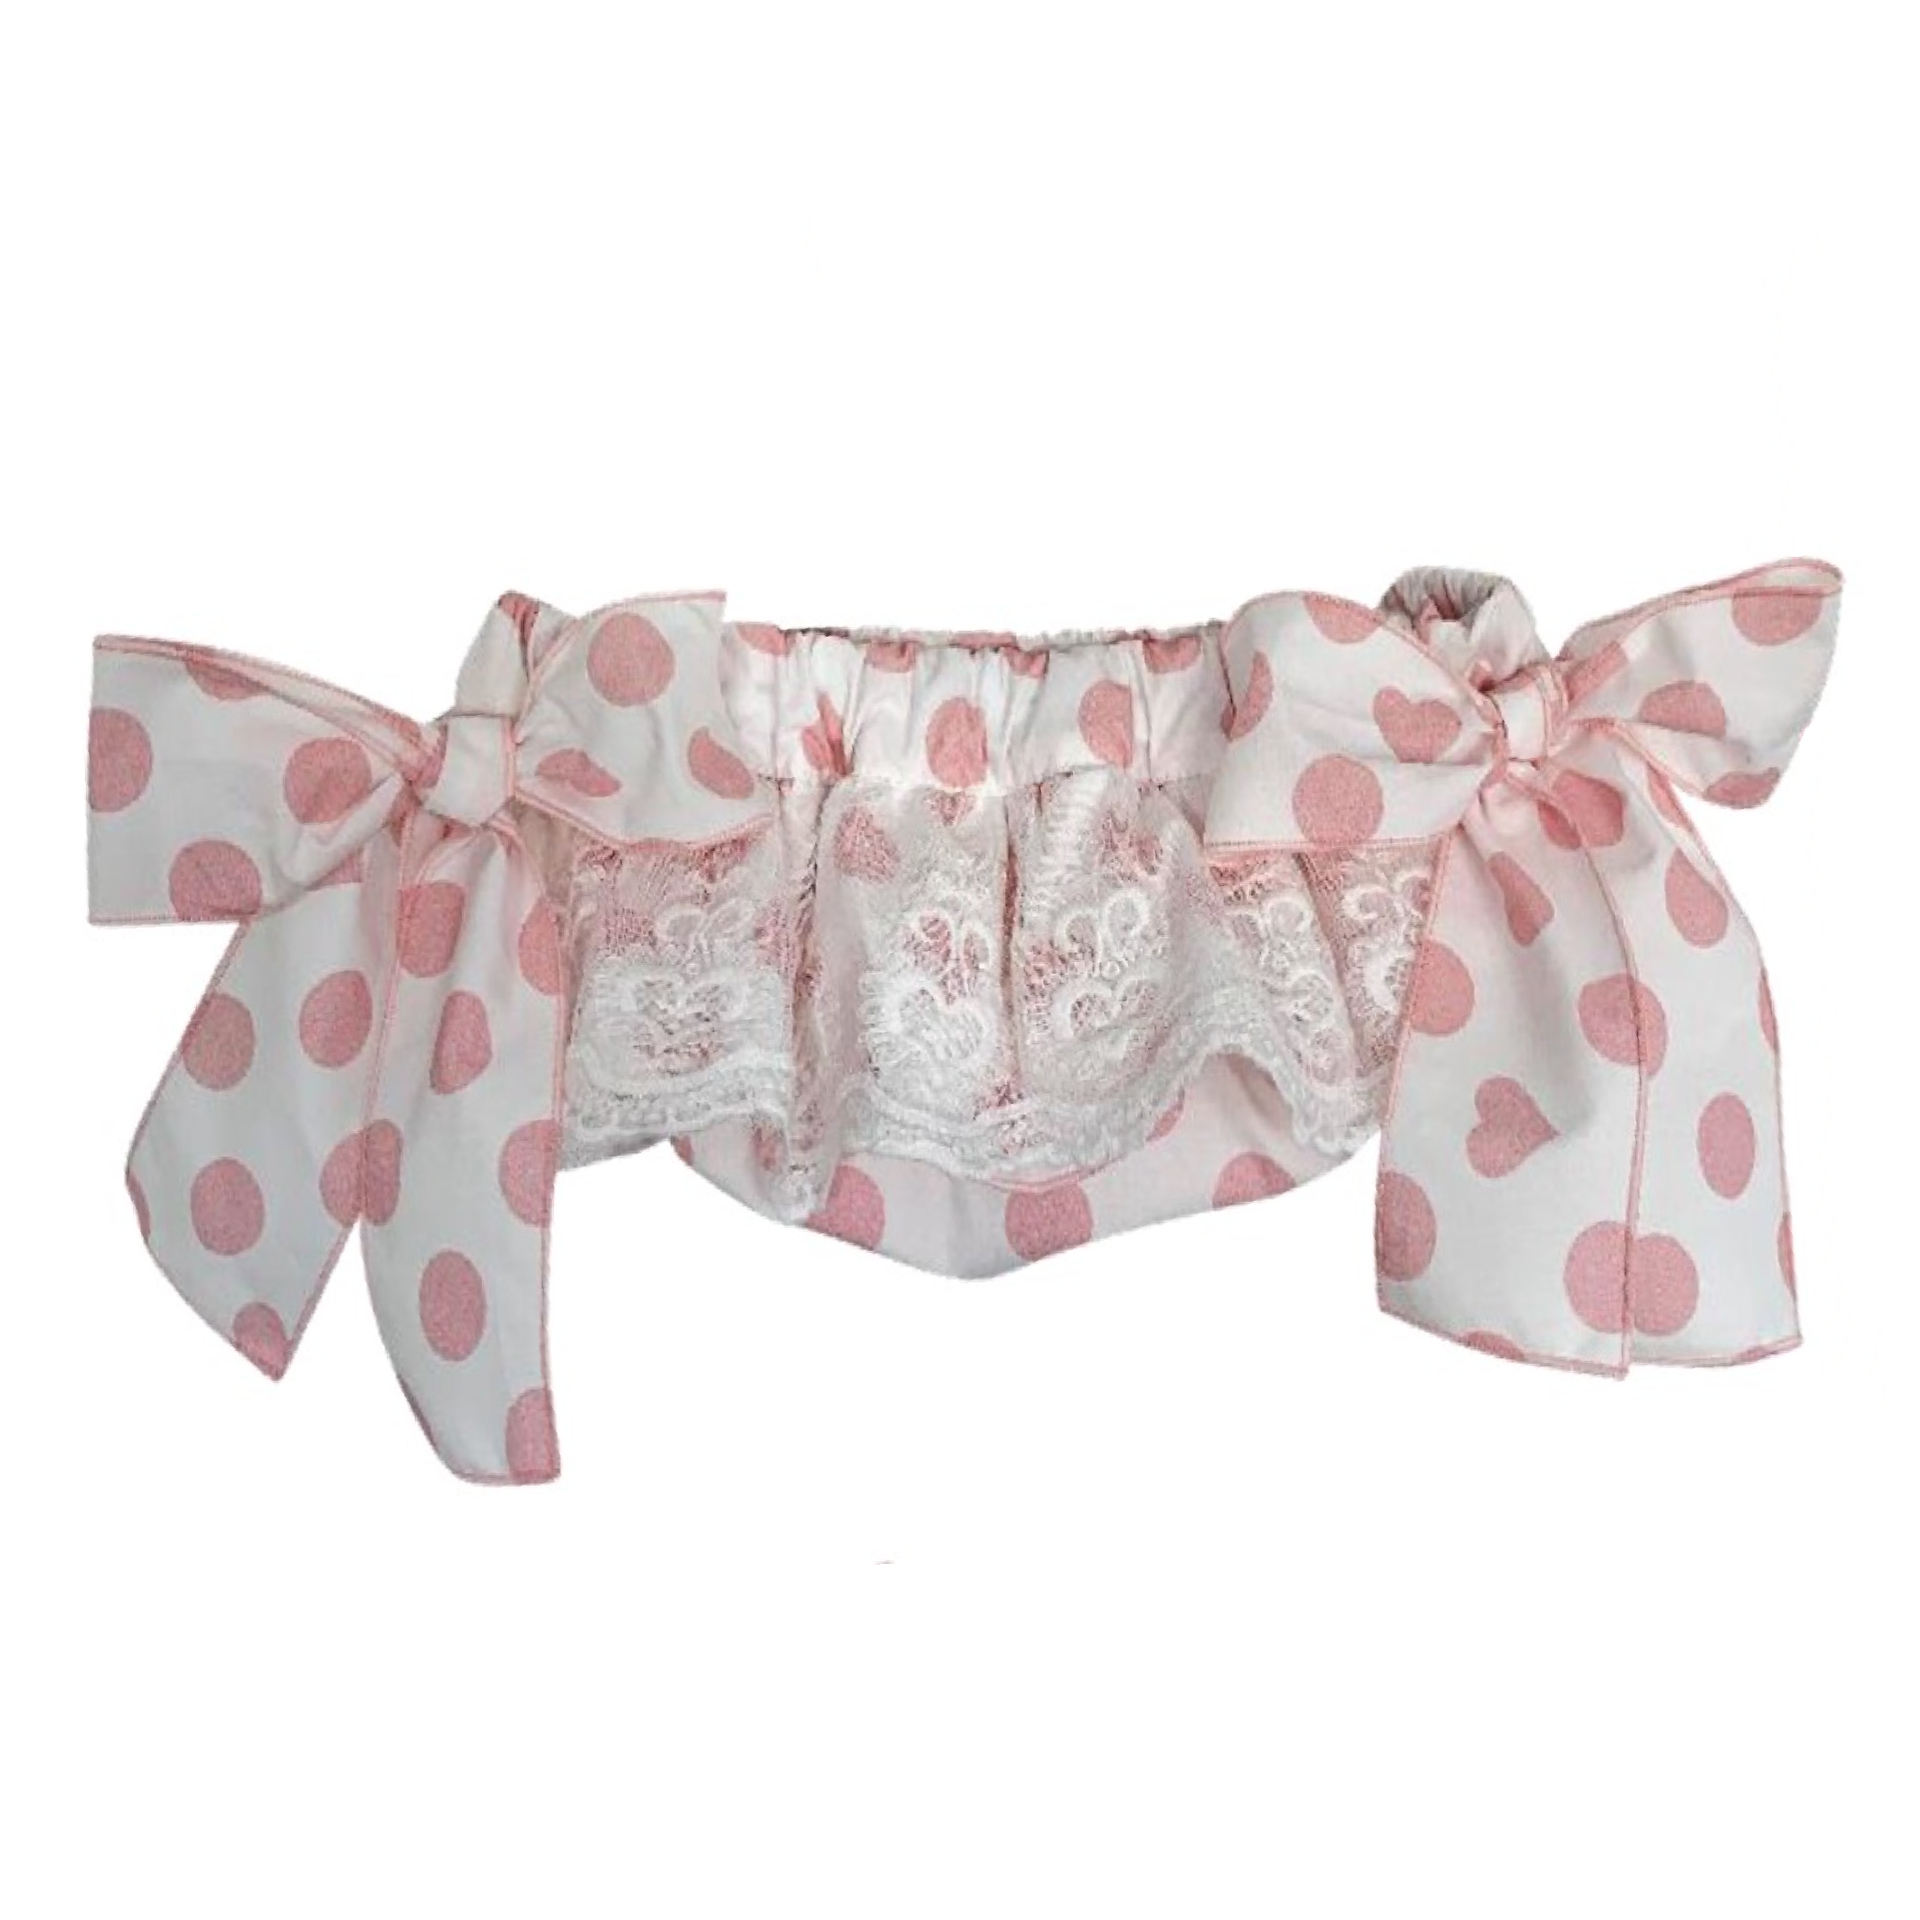 White with pink dots lace bloomer